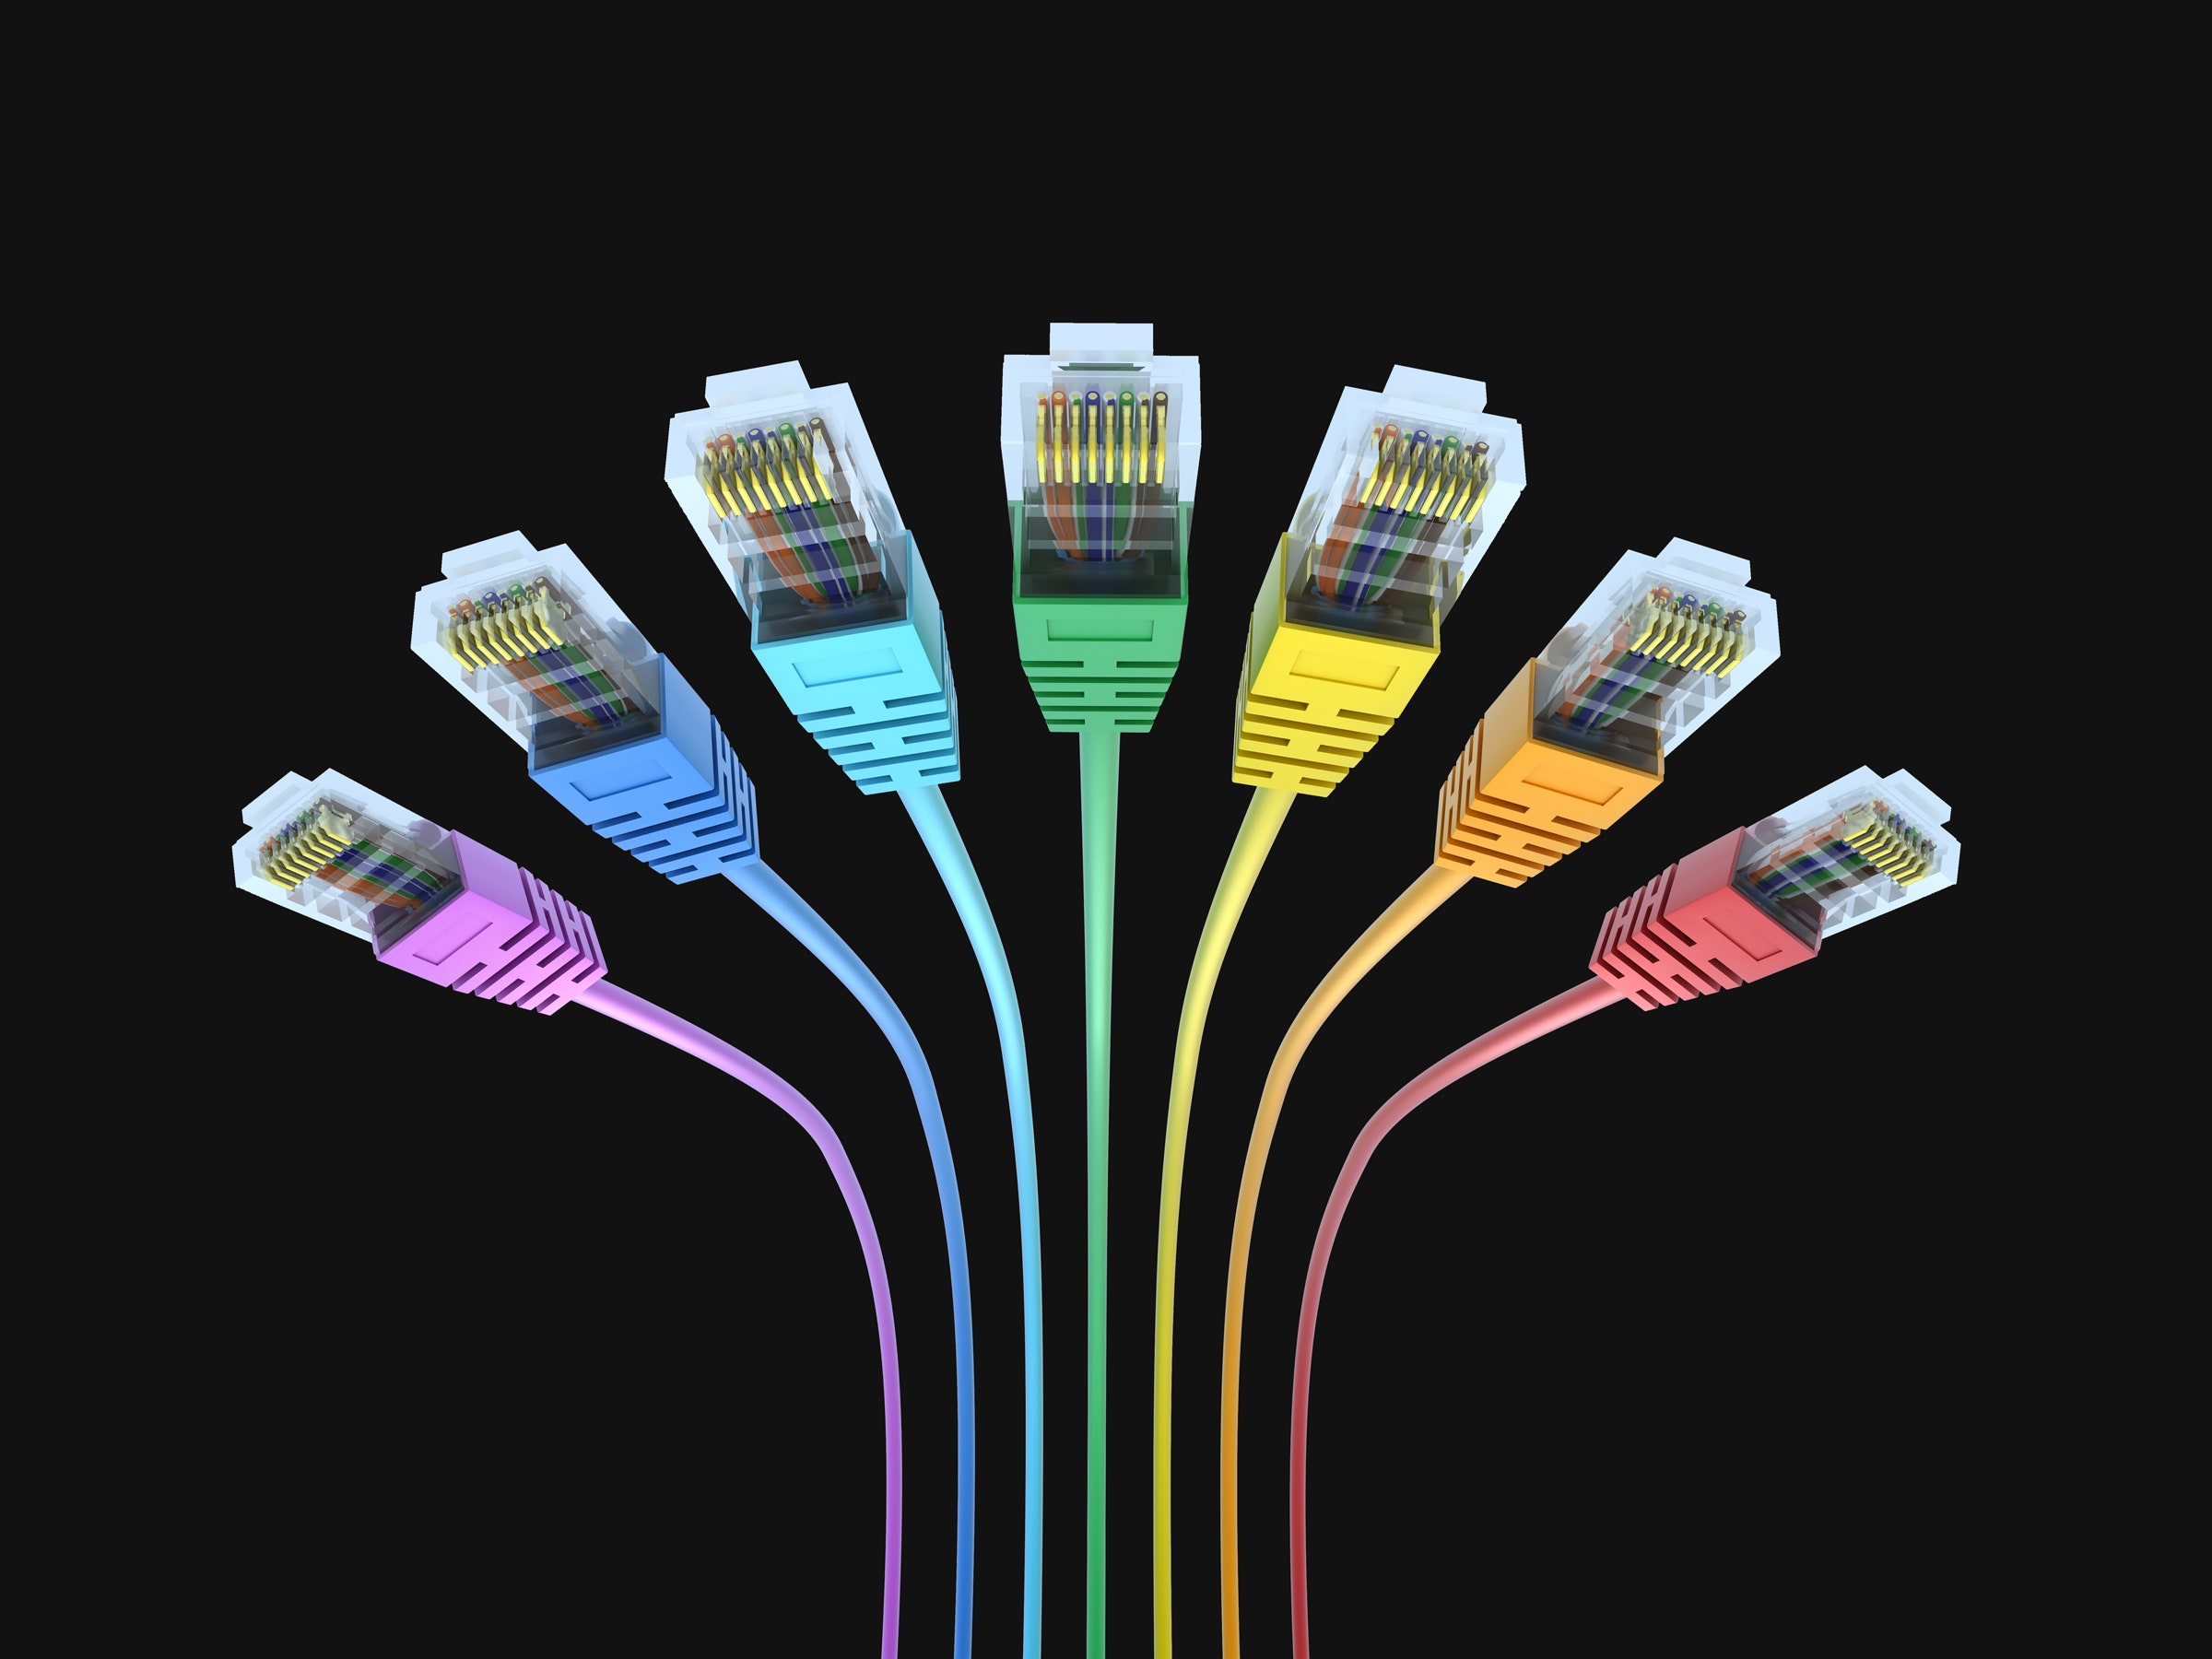 Ethernet is a wired networking technology that uses cables to connect devices to a network.
Wi-Fi is a wireless networking technology that allows devices to connect to a network without the need for cables.